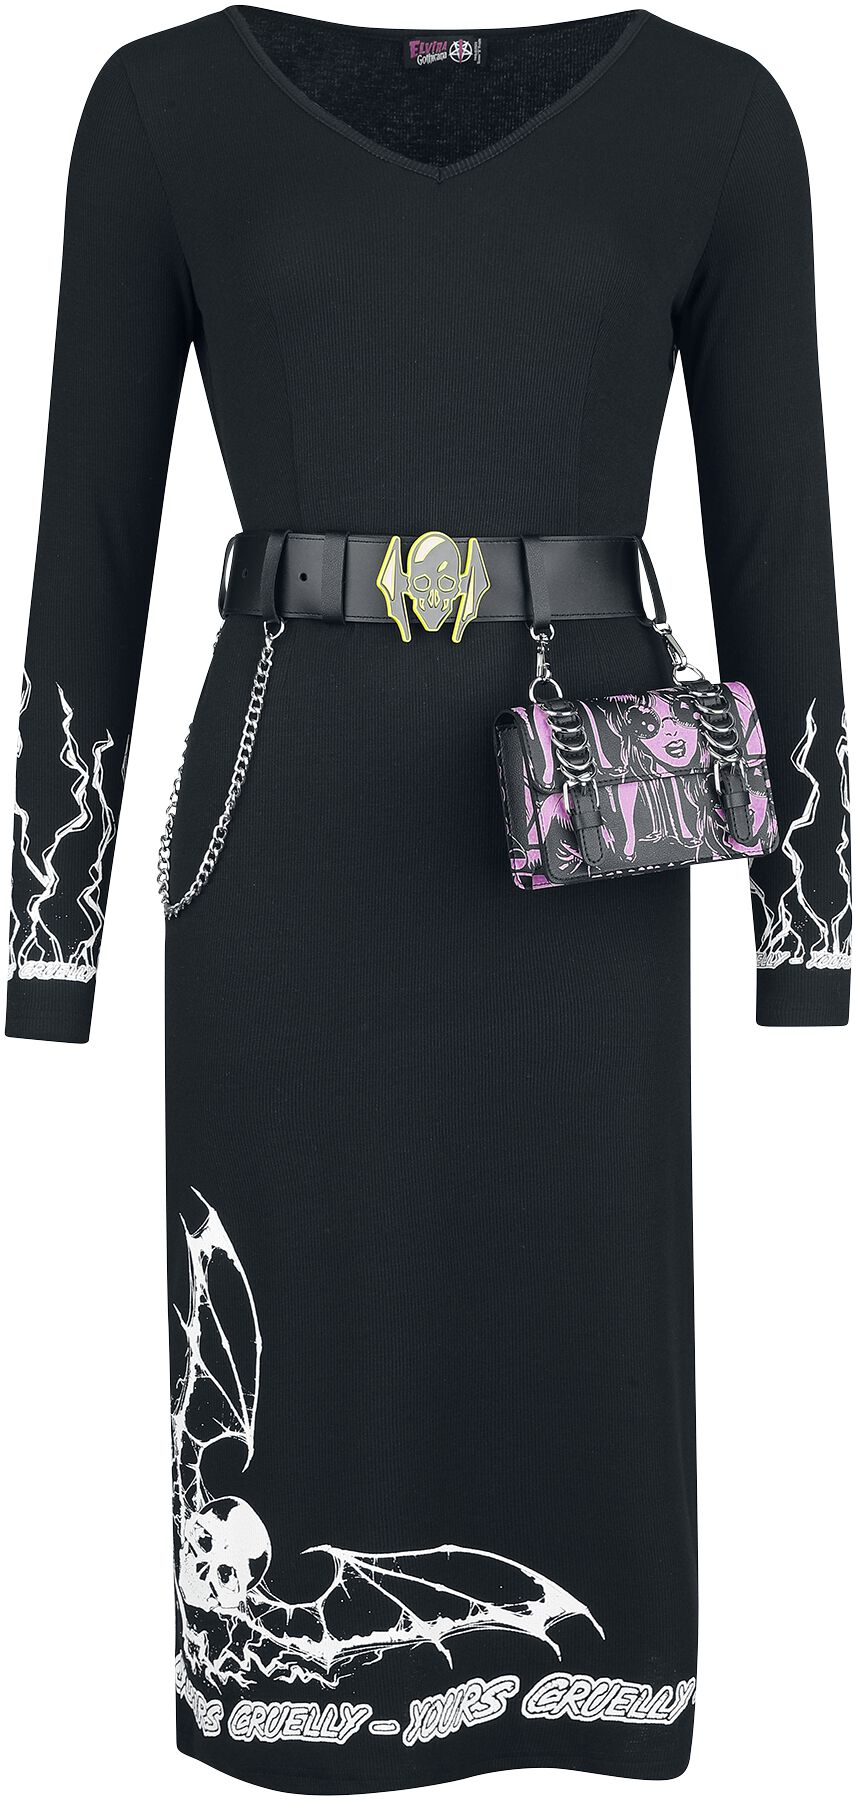 Image of Abito media lunghezza Gothic di Gothicana by EMP - Gothicana X Elvira dress with belt and bag - XS a XXL - Donna - nero